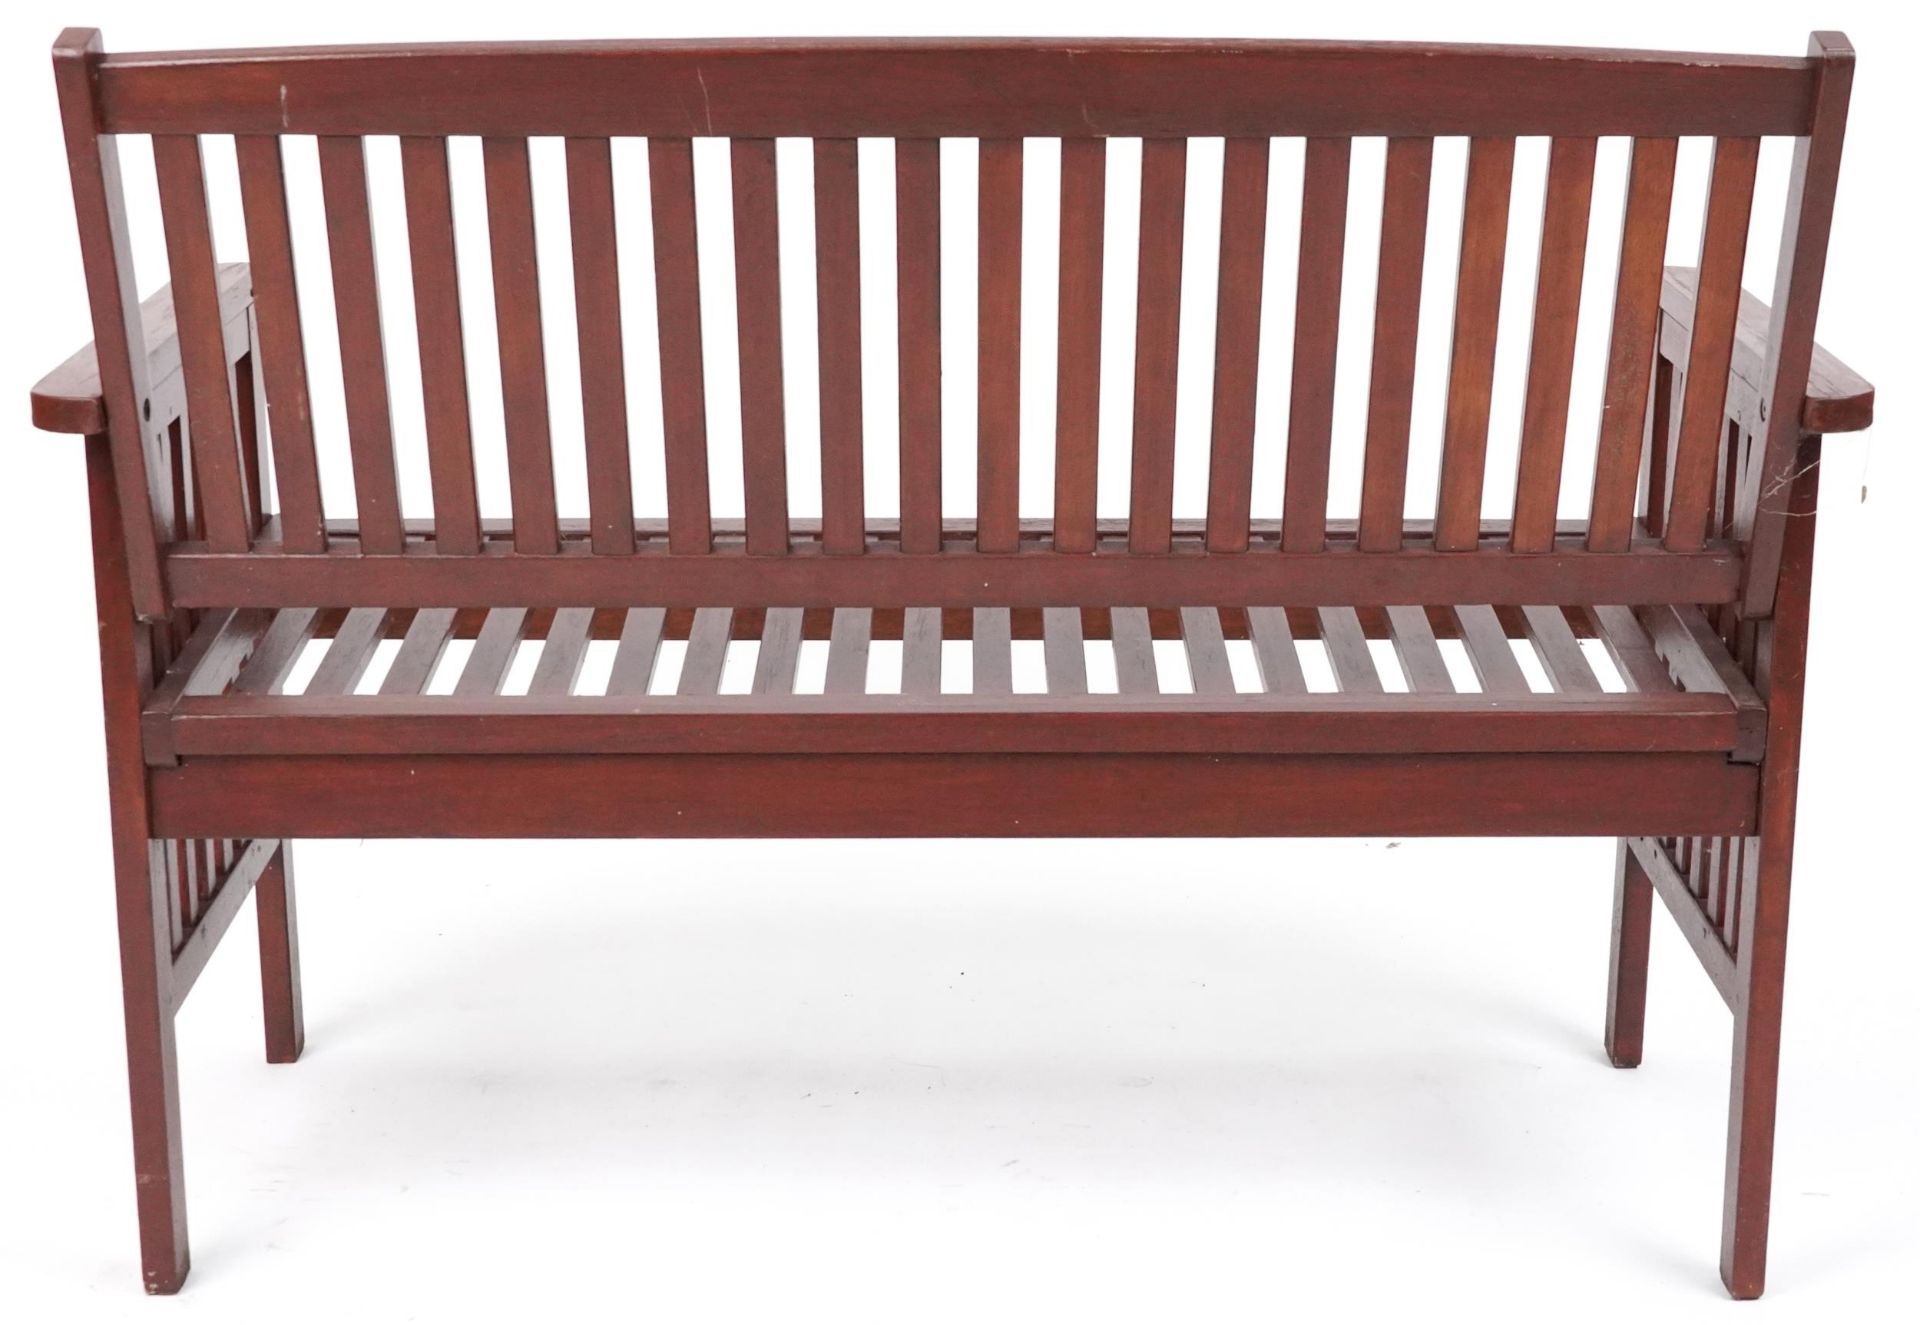 Stained teak slatted garden bench, 89cm H x 118.5cm W x 58cm D - Image 4 of 5